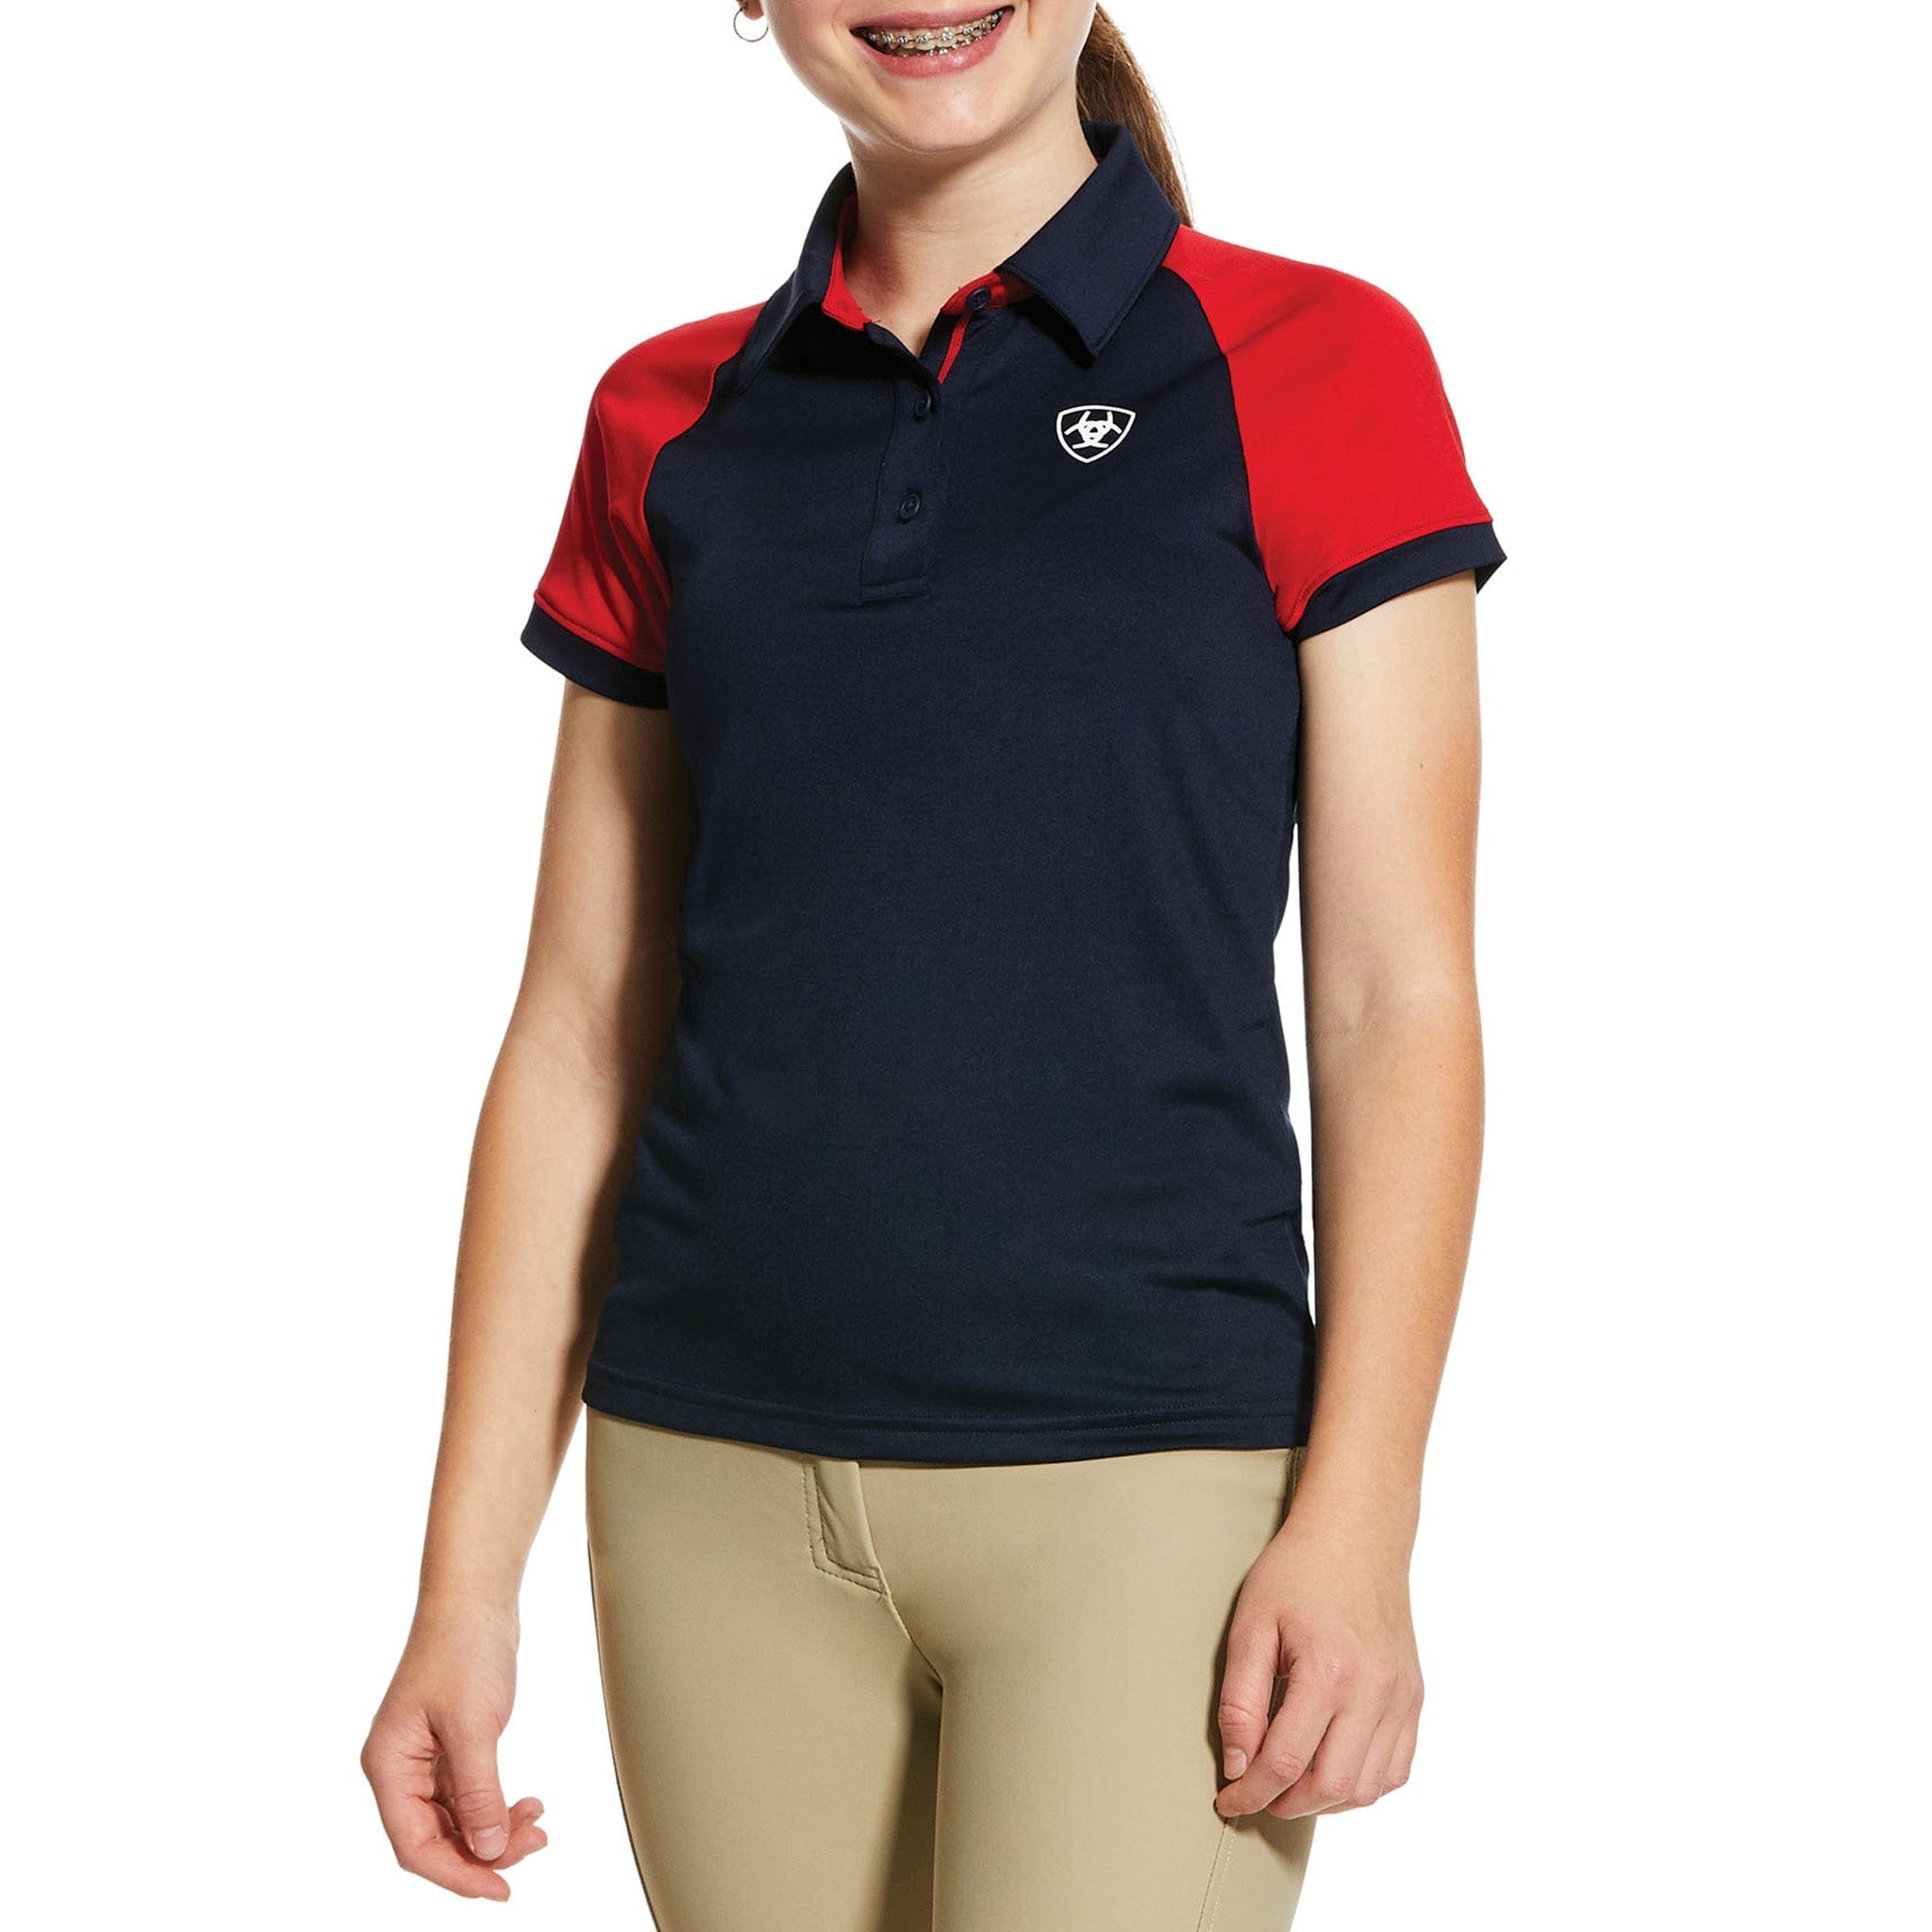 Ariat Youth Team 3.0 Polo Shirt 10030461 Navy and Red Front On Model